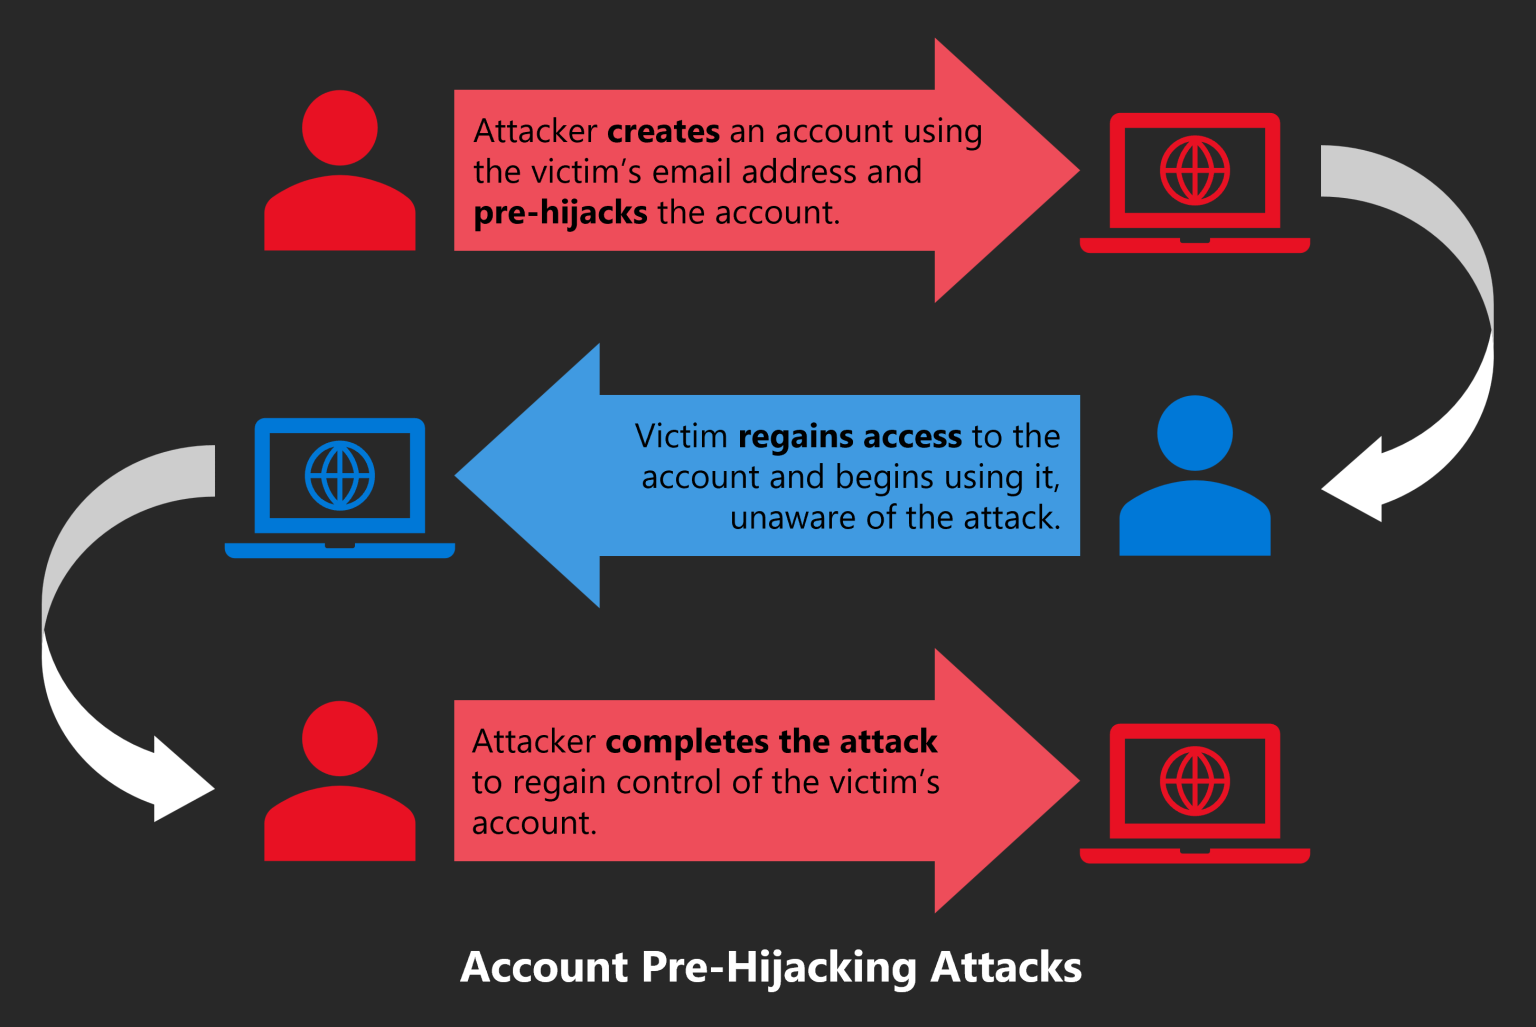 Account Pre-Hijacking Attacks Overview-1536x1027